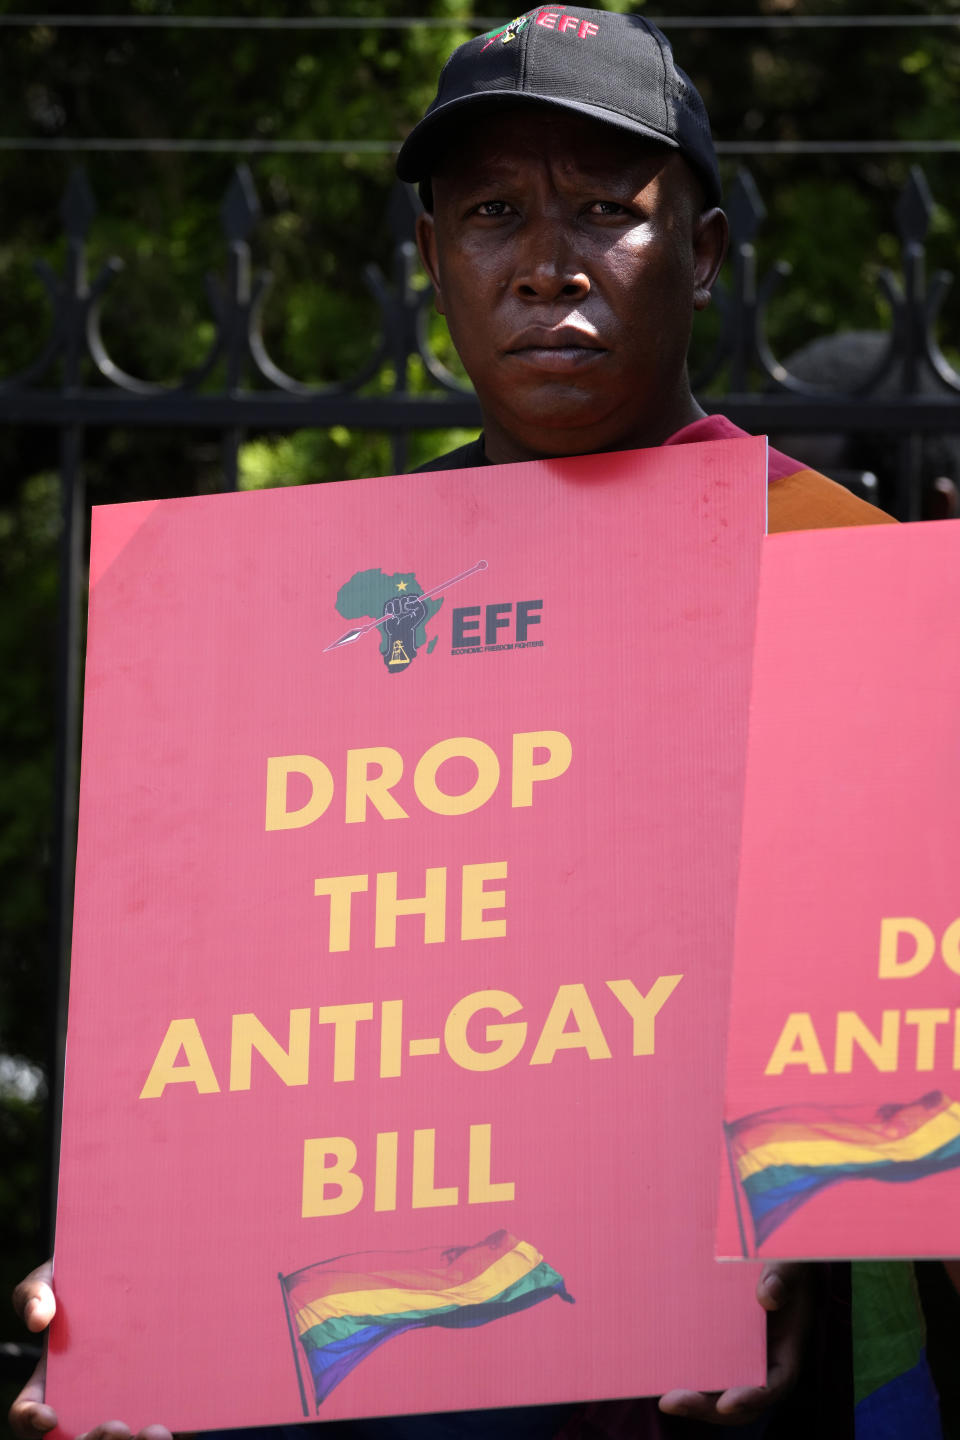 The Economic Freedom Fighters (EFF) leader Julius Malema holds a placard during their picket against Uganda's anti-homosexuality bill at the Ugandan High Commission in Pretoria, South Africa, Tuesday, April 4, 2023. Uganda's legislature last week passed the anti-homosexuality bill. The legislation is now with President Yoweri Museveni, who can sign it into law or return it back to the parliamentary speaker with proposed changes. (AP Photo/Themba Hadebe)